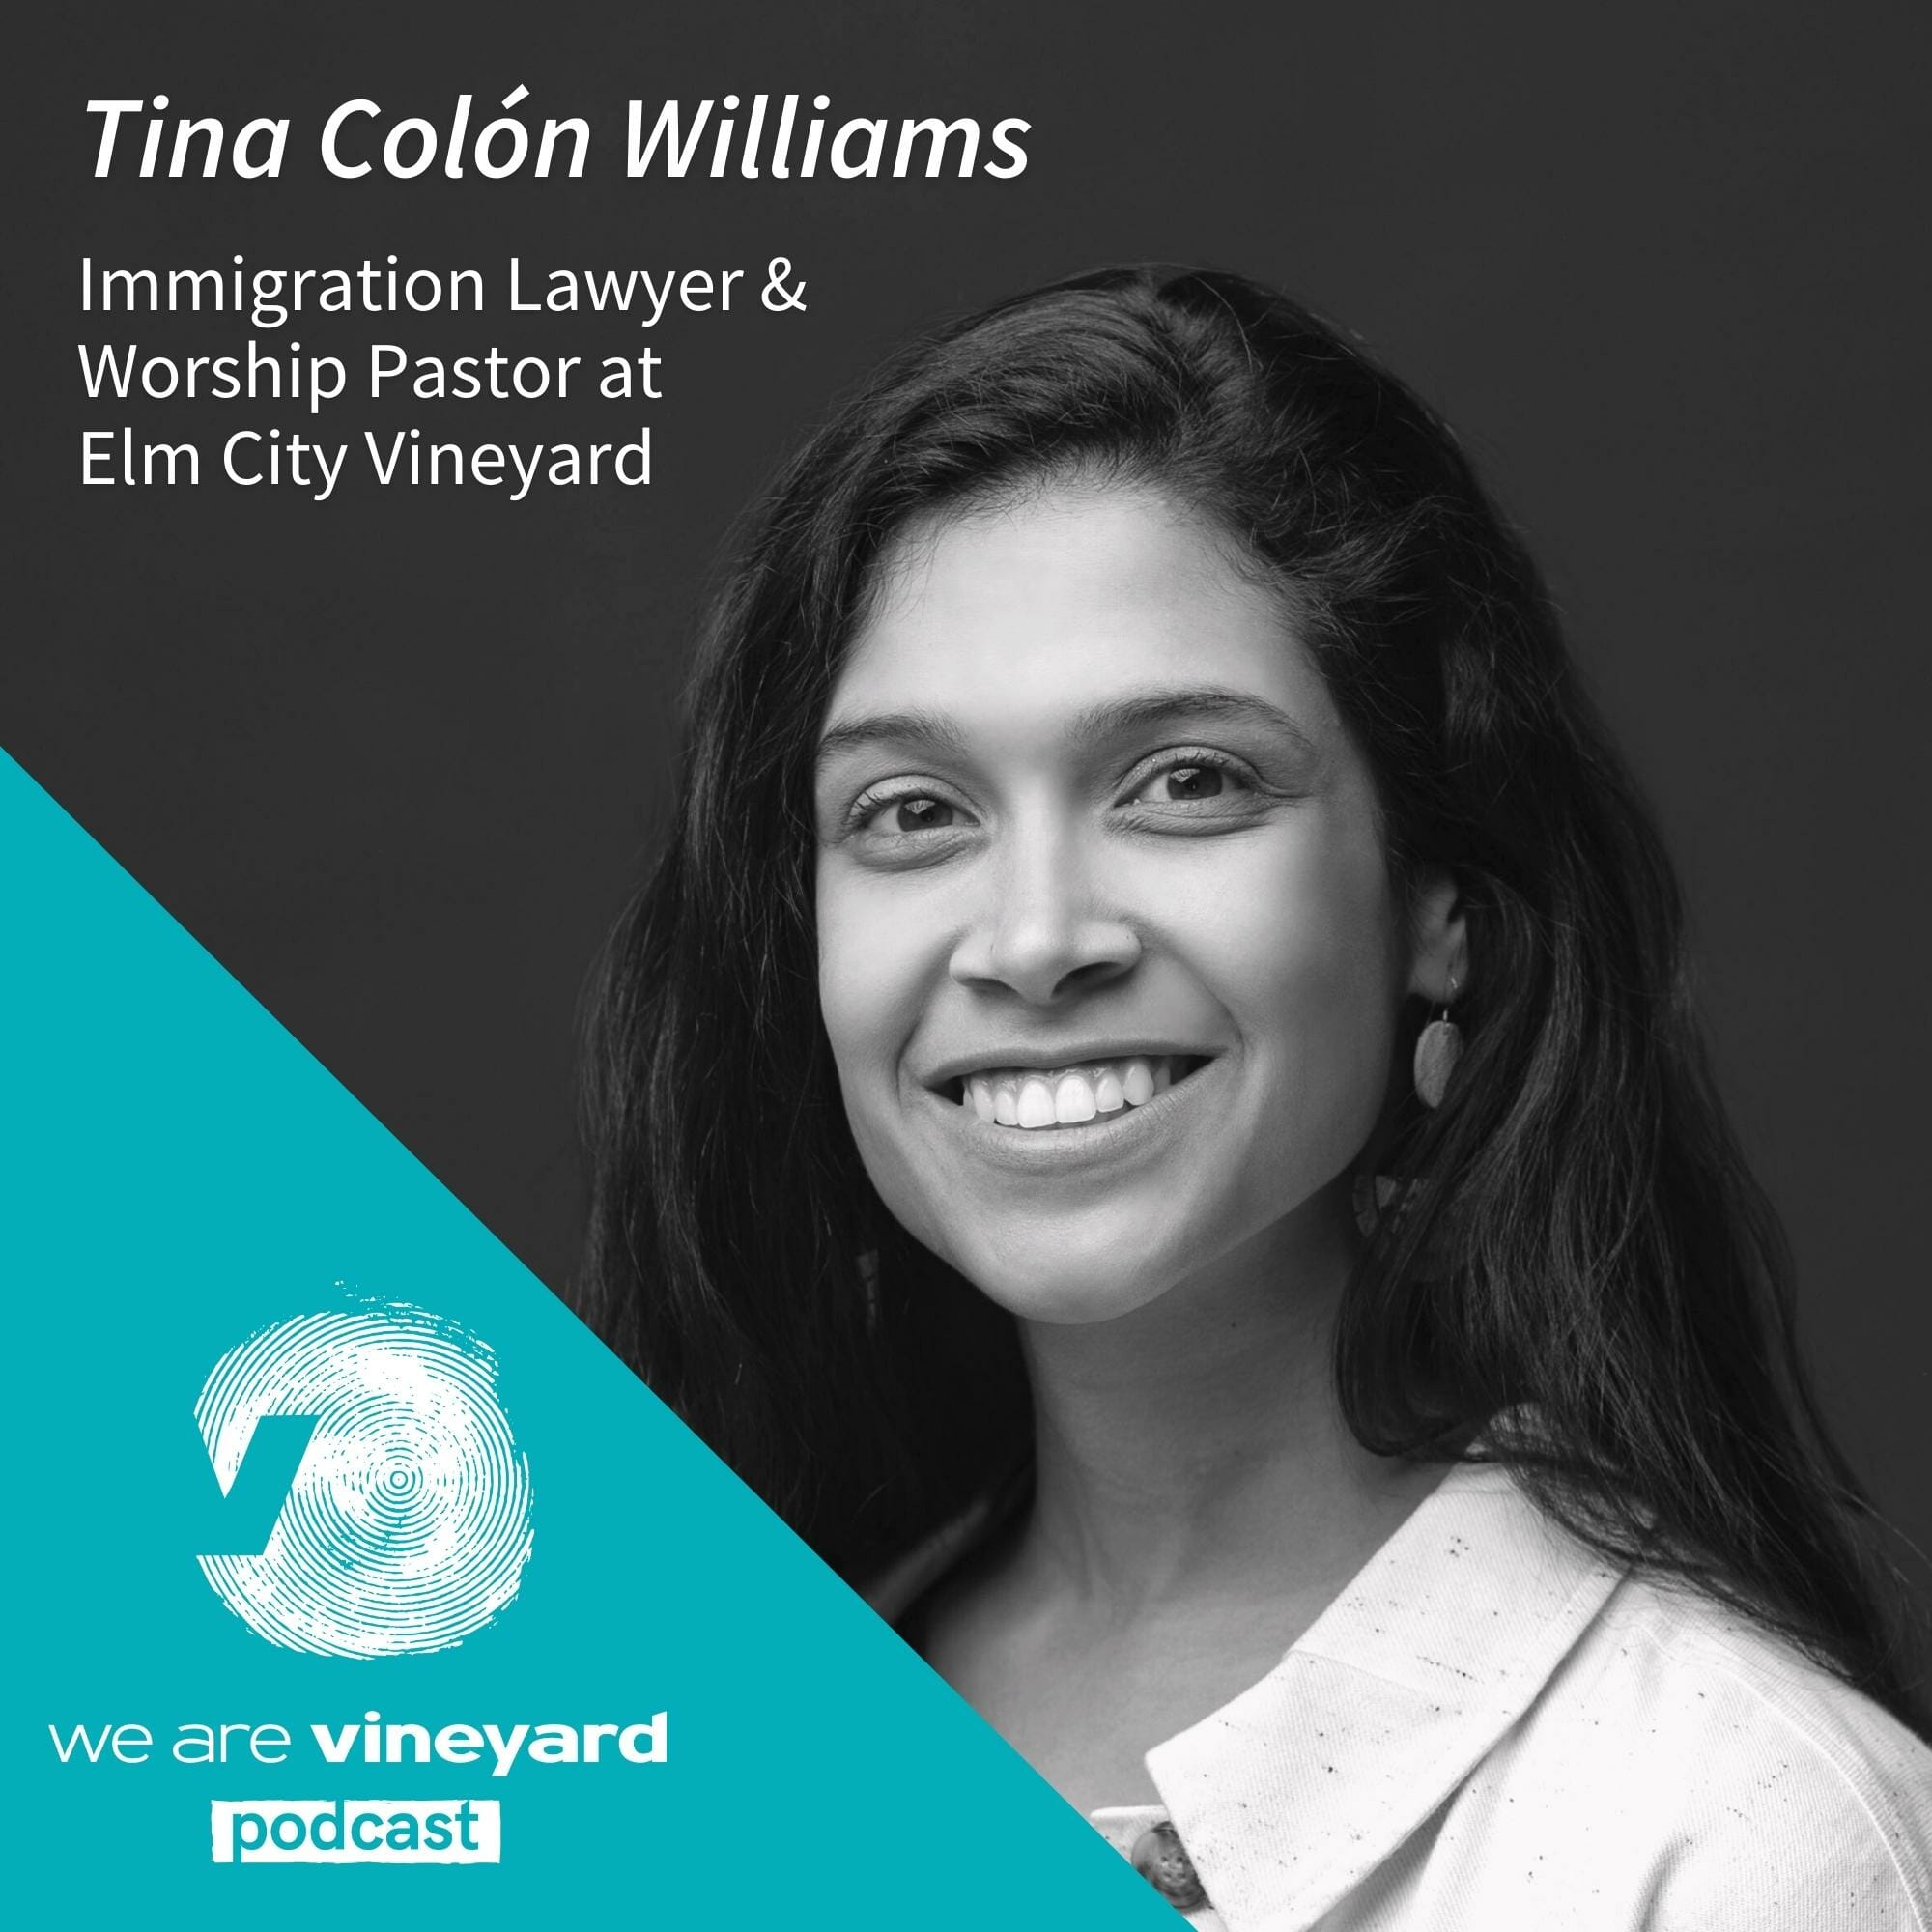 Tina Colón Williams: The Kingdom Work Of Immigration Law